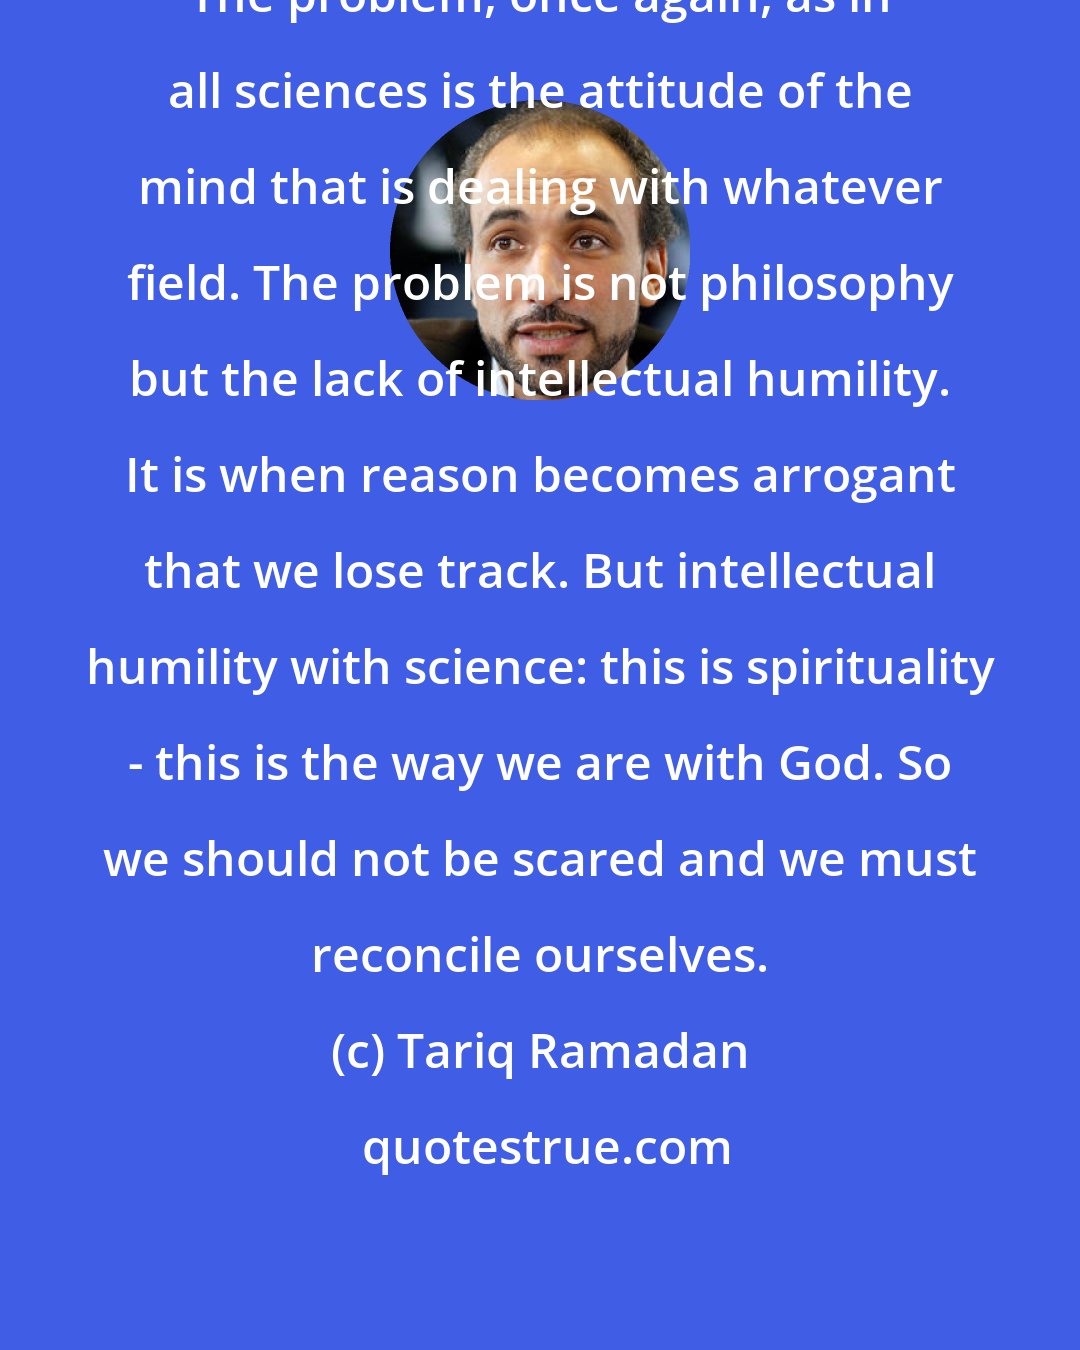 Tariq Ramadan: The problem, once again, as in all sciences is the attitude of the mind that is dealing with whatever field. The problem is not philosophy but the lack of intellectual humility. It is when reason becomes arrogant that we lose track. But intellectual humility with science: this is spirituality - this is the way we are with God. So we should not be scared and we must reconcile ourselves.